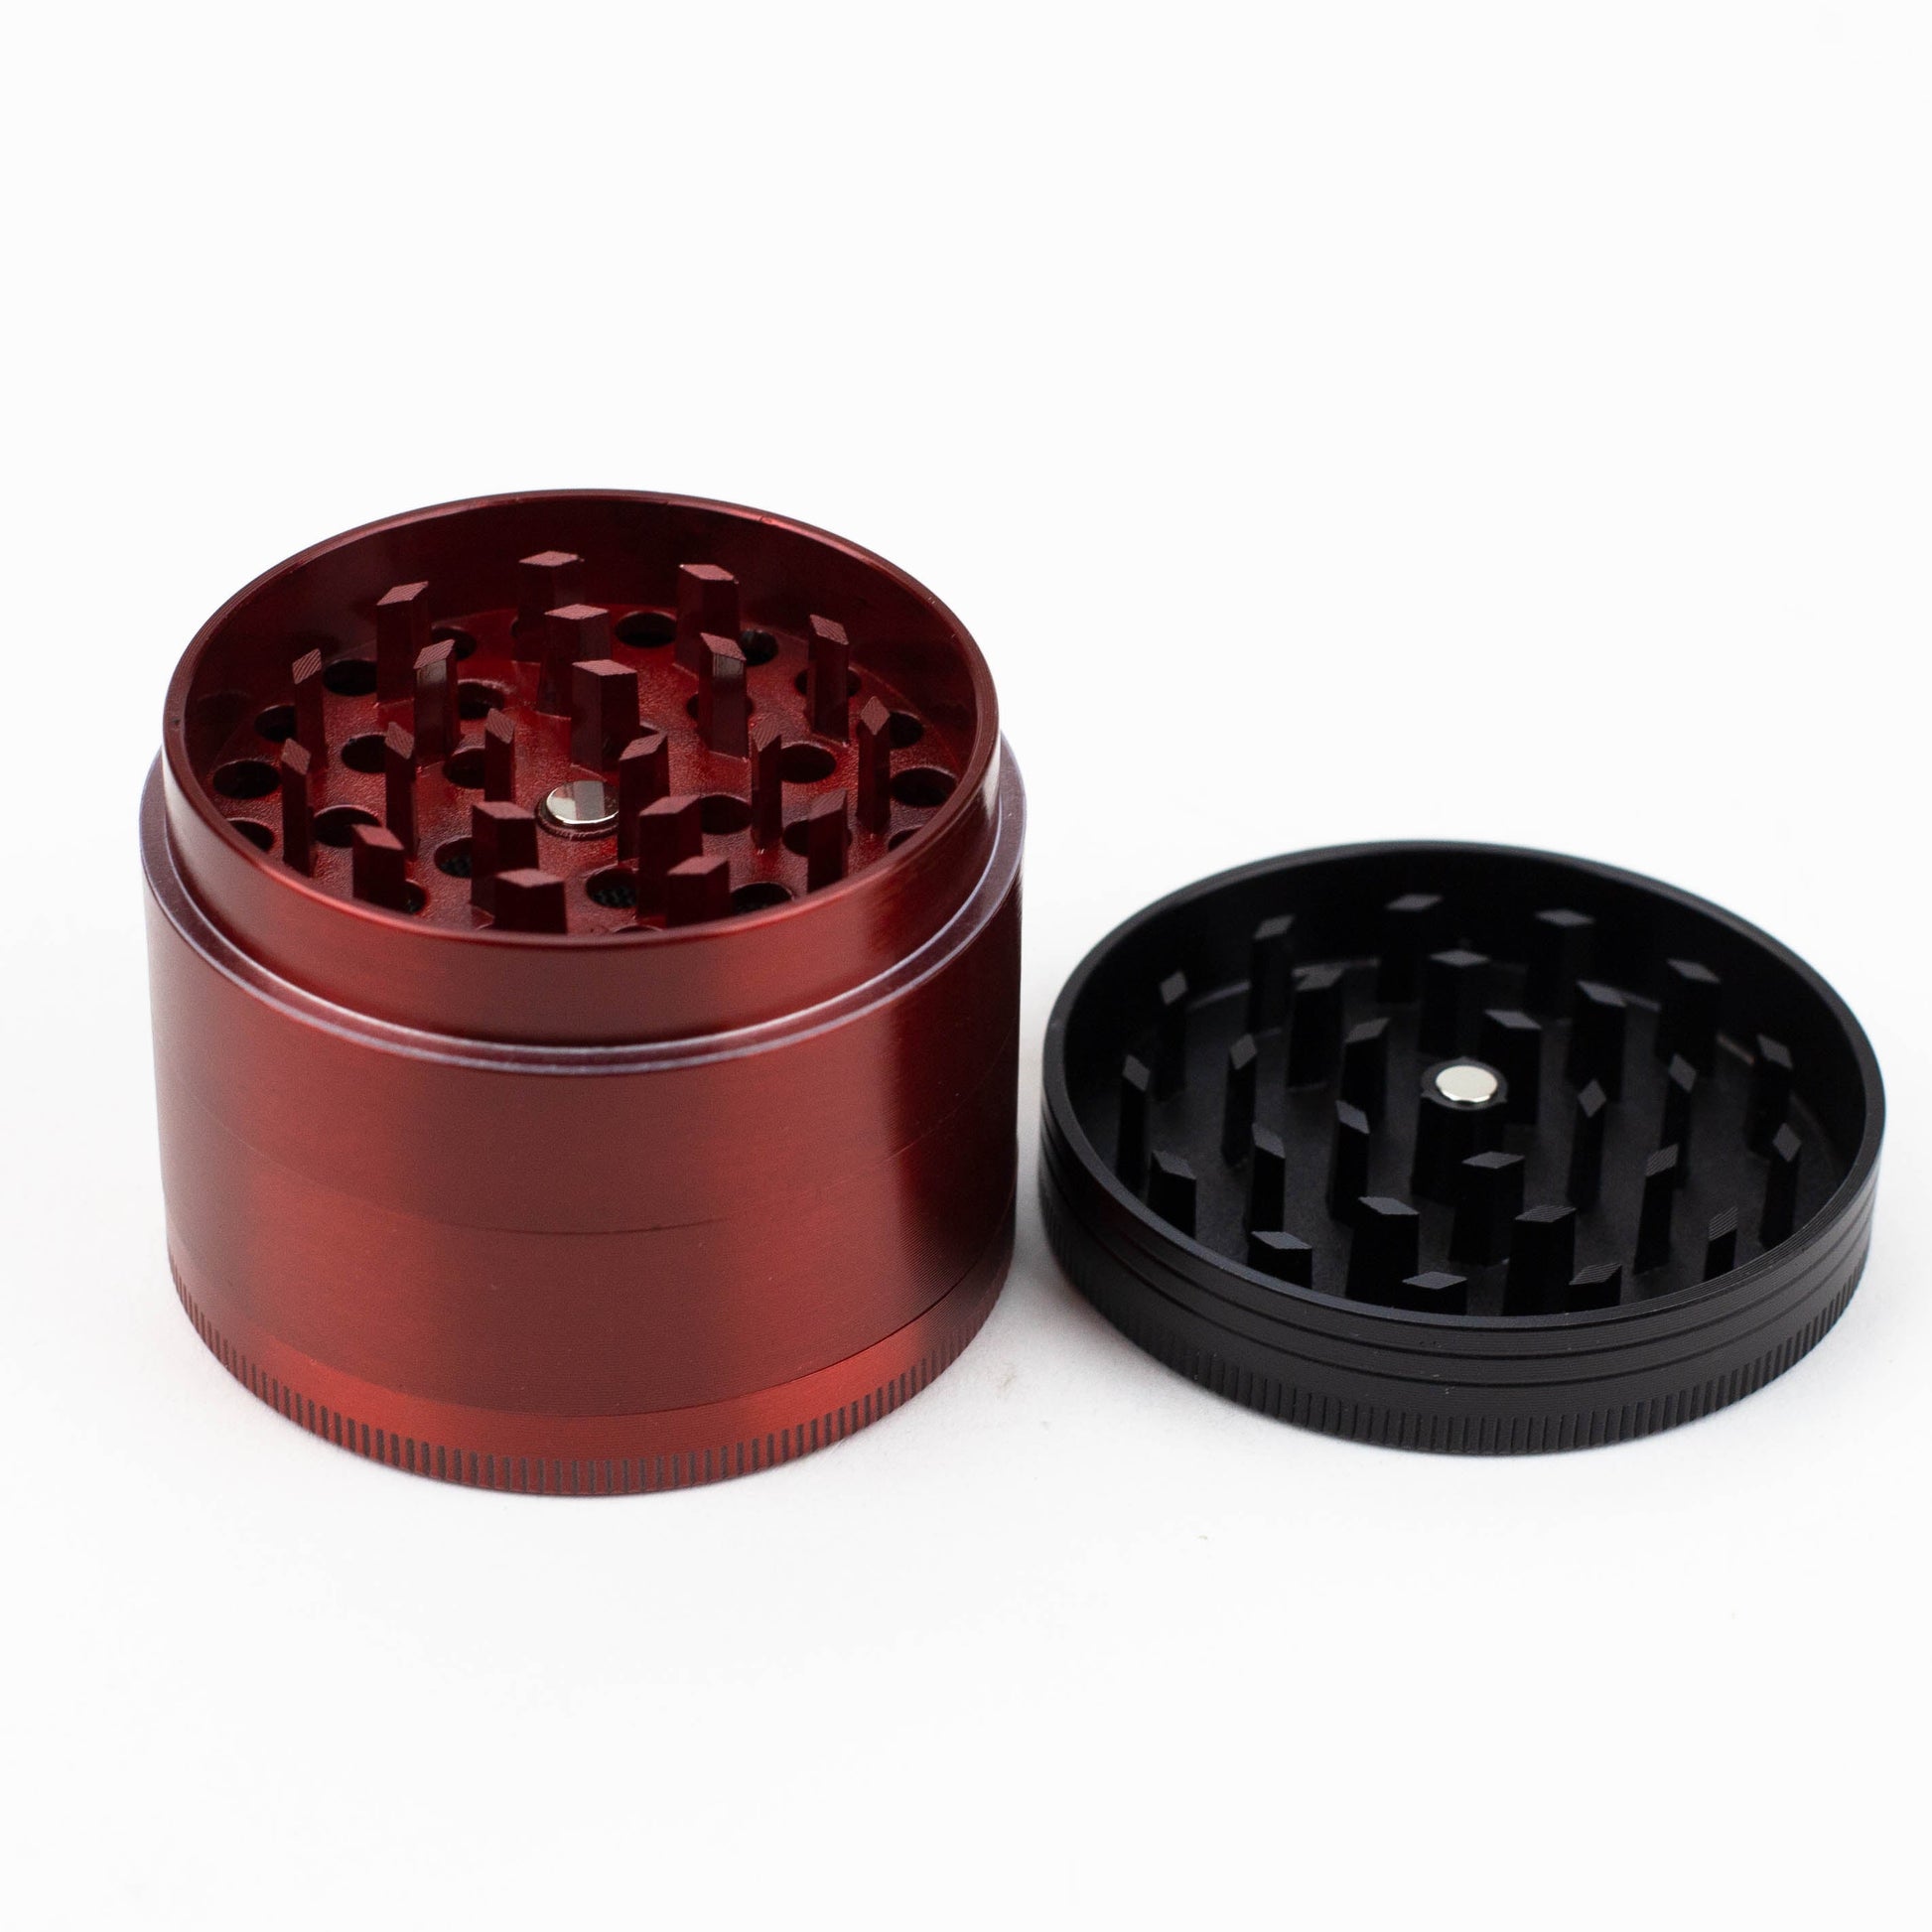 DEATH ROW - 4 parts metal red grinder by Infyniti_4